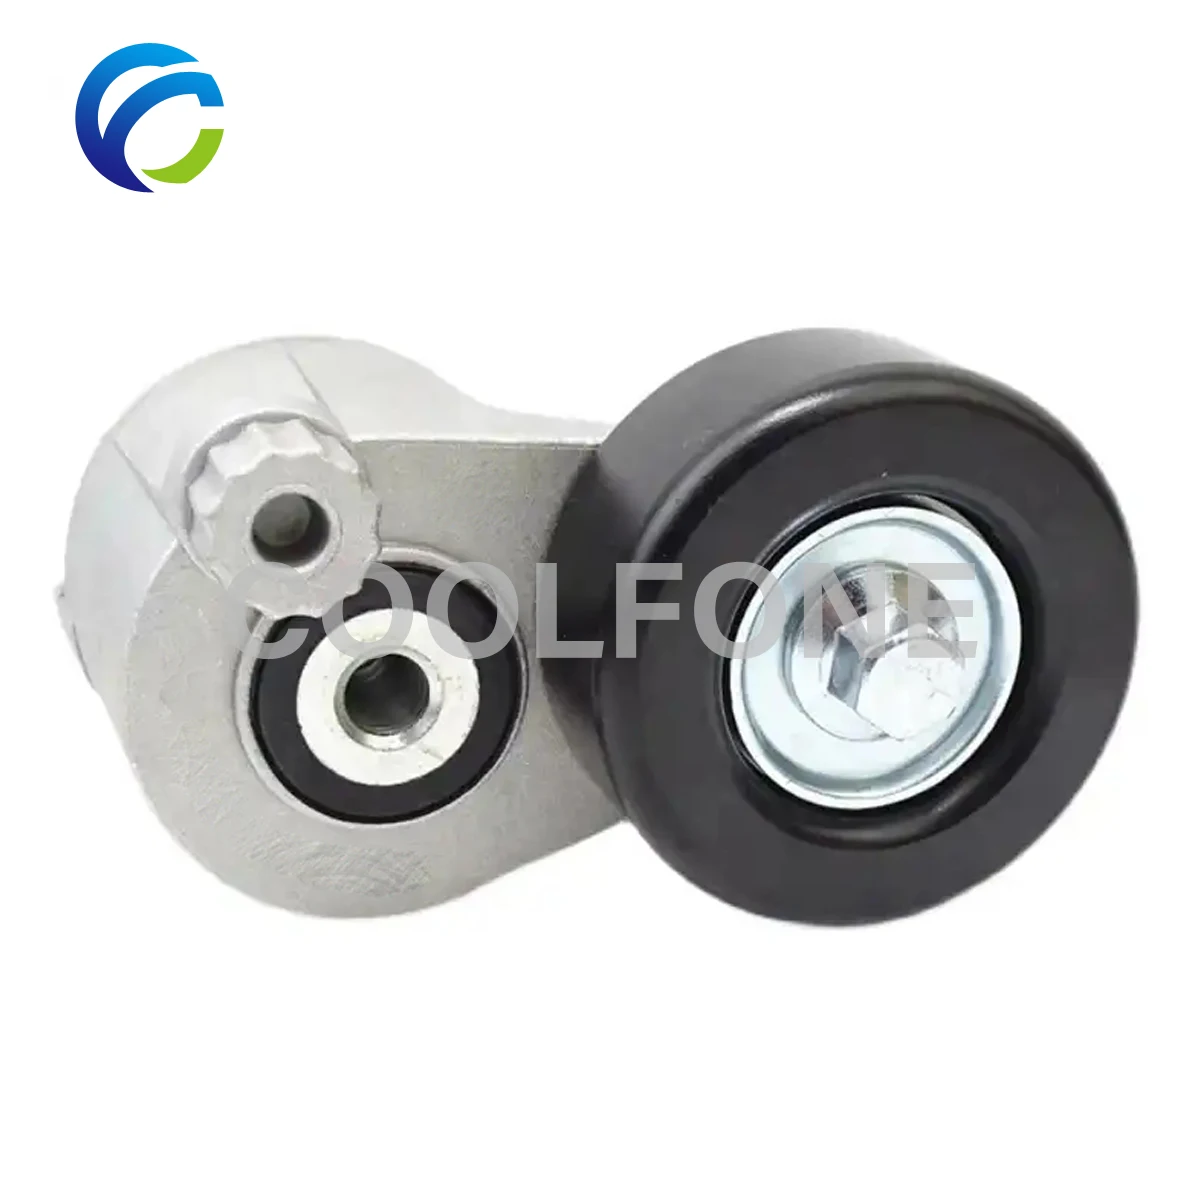 

Drive Belt Automatic Tensioner for Chevrolet Optra Enjoy S Wuling Cortez S 730 WULING HONGGUANG 1.5 23914889 24555522